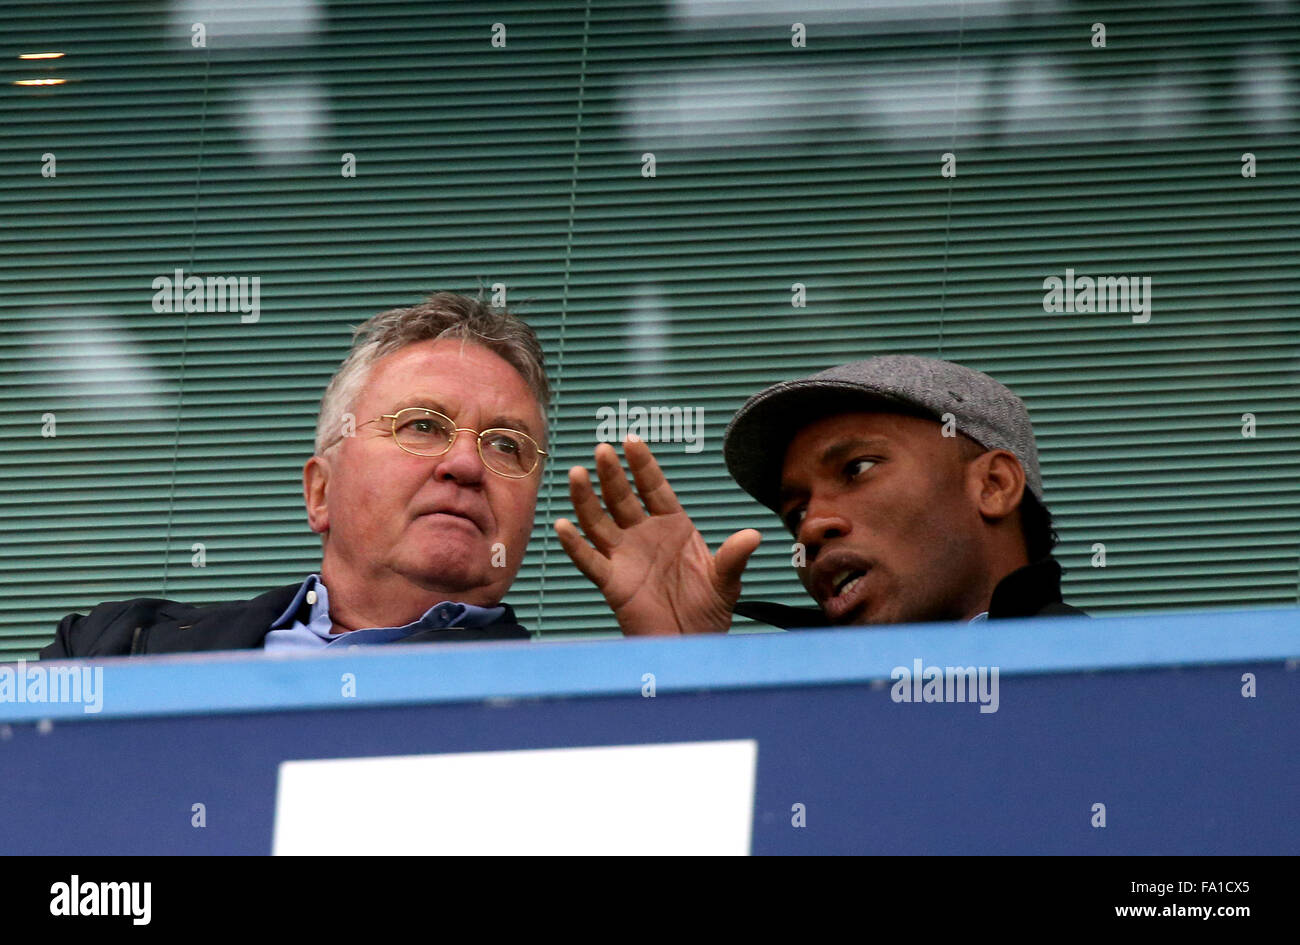 London, Britain. 19th Dec, 2015. Guus Hiddink (L) talks with Former Chelsea star Didier Drogba during the Barclays Premier League match between Chelsea and Sunderland in London, Britain, on Dec. 19, 2015. Guus Hiddink has been appointed first-team manager until the end of the season. © Han Yan/Xinhua/Alamy Live News Stock Photo